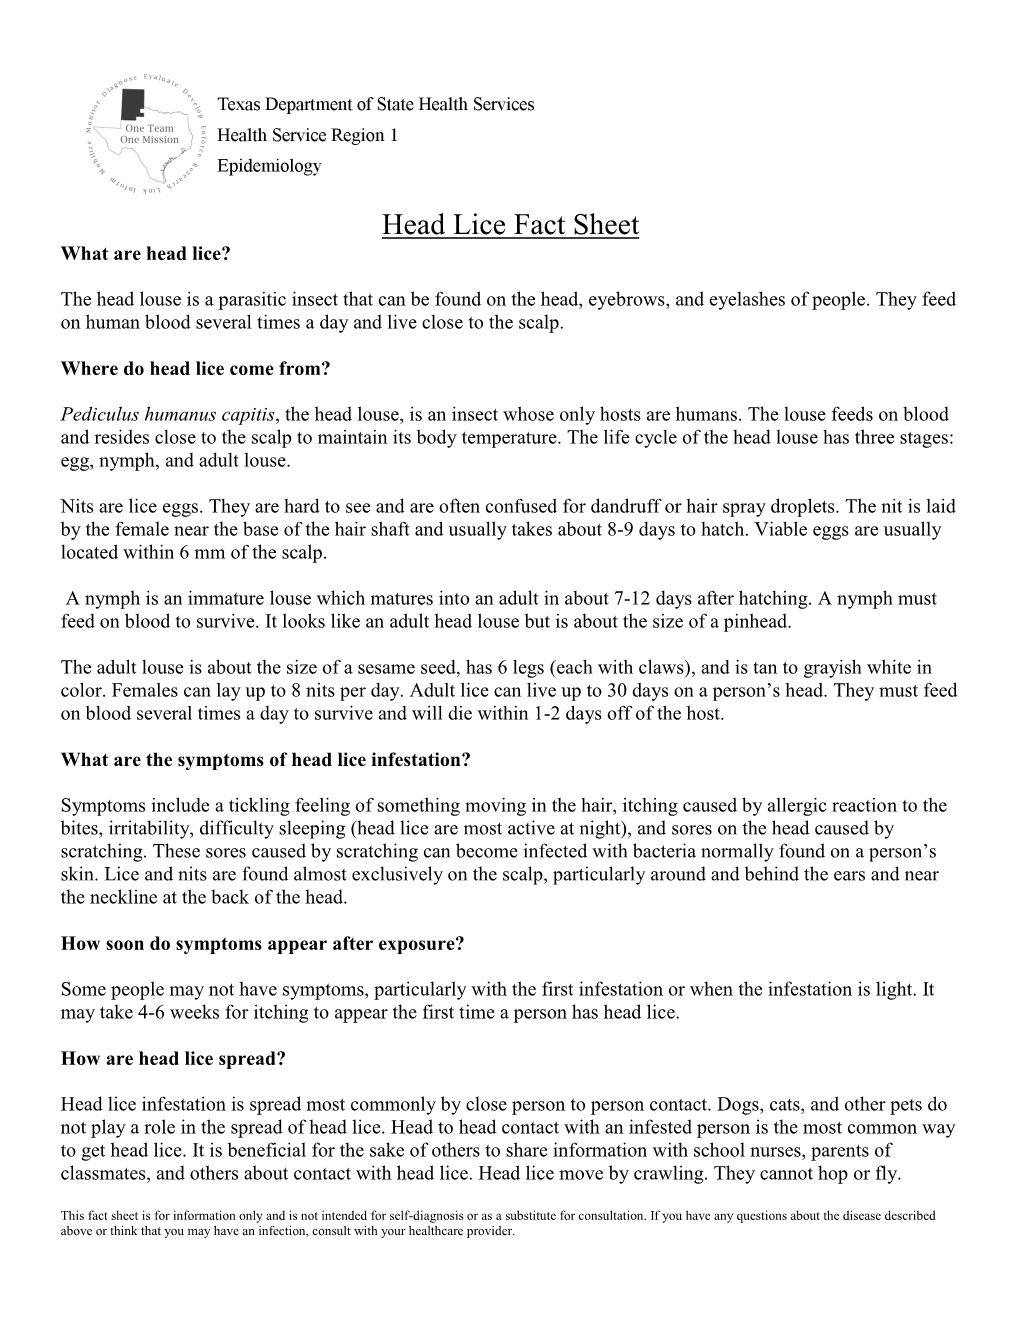 Head Lice Fact Sheet What Are Head Lice?